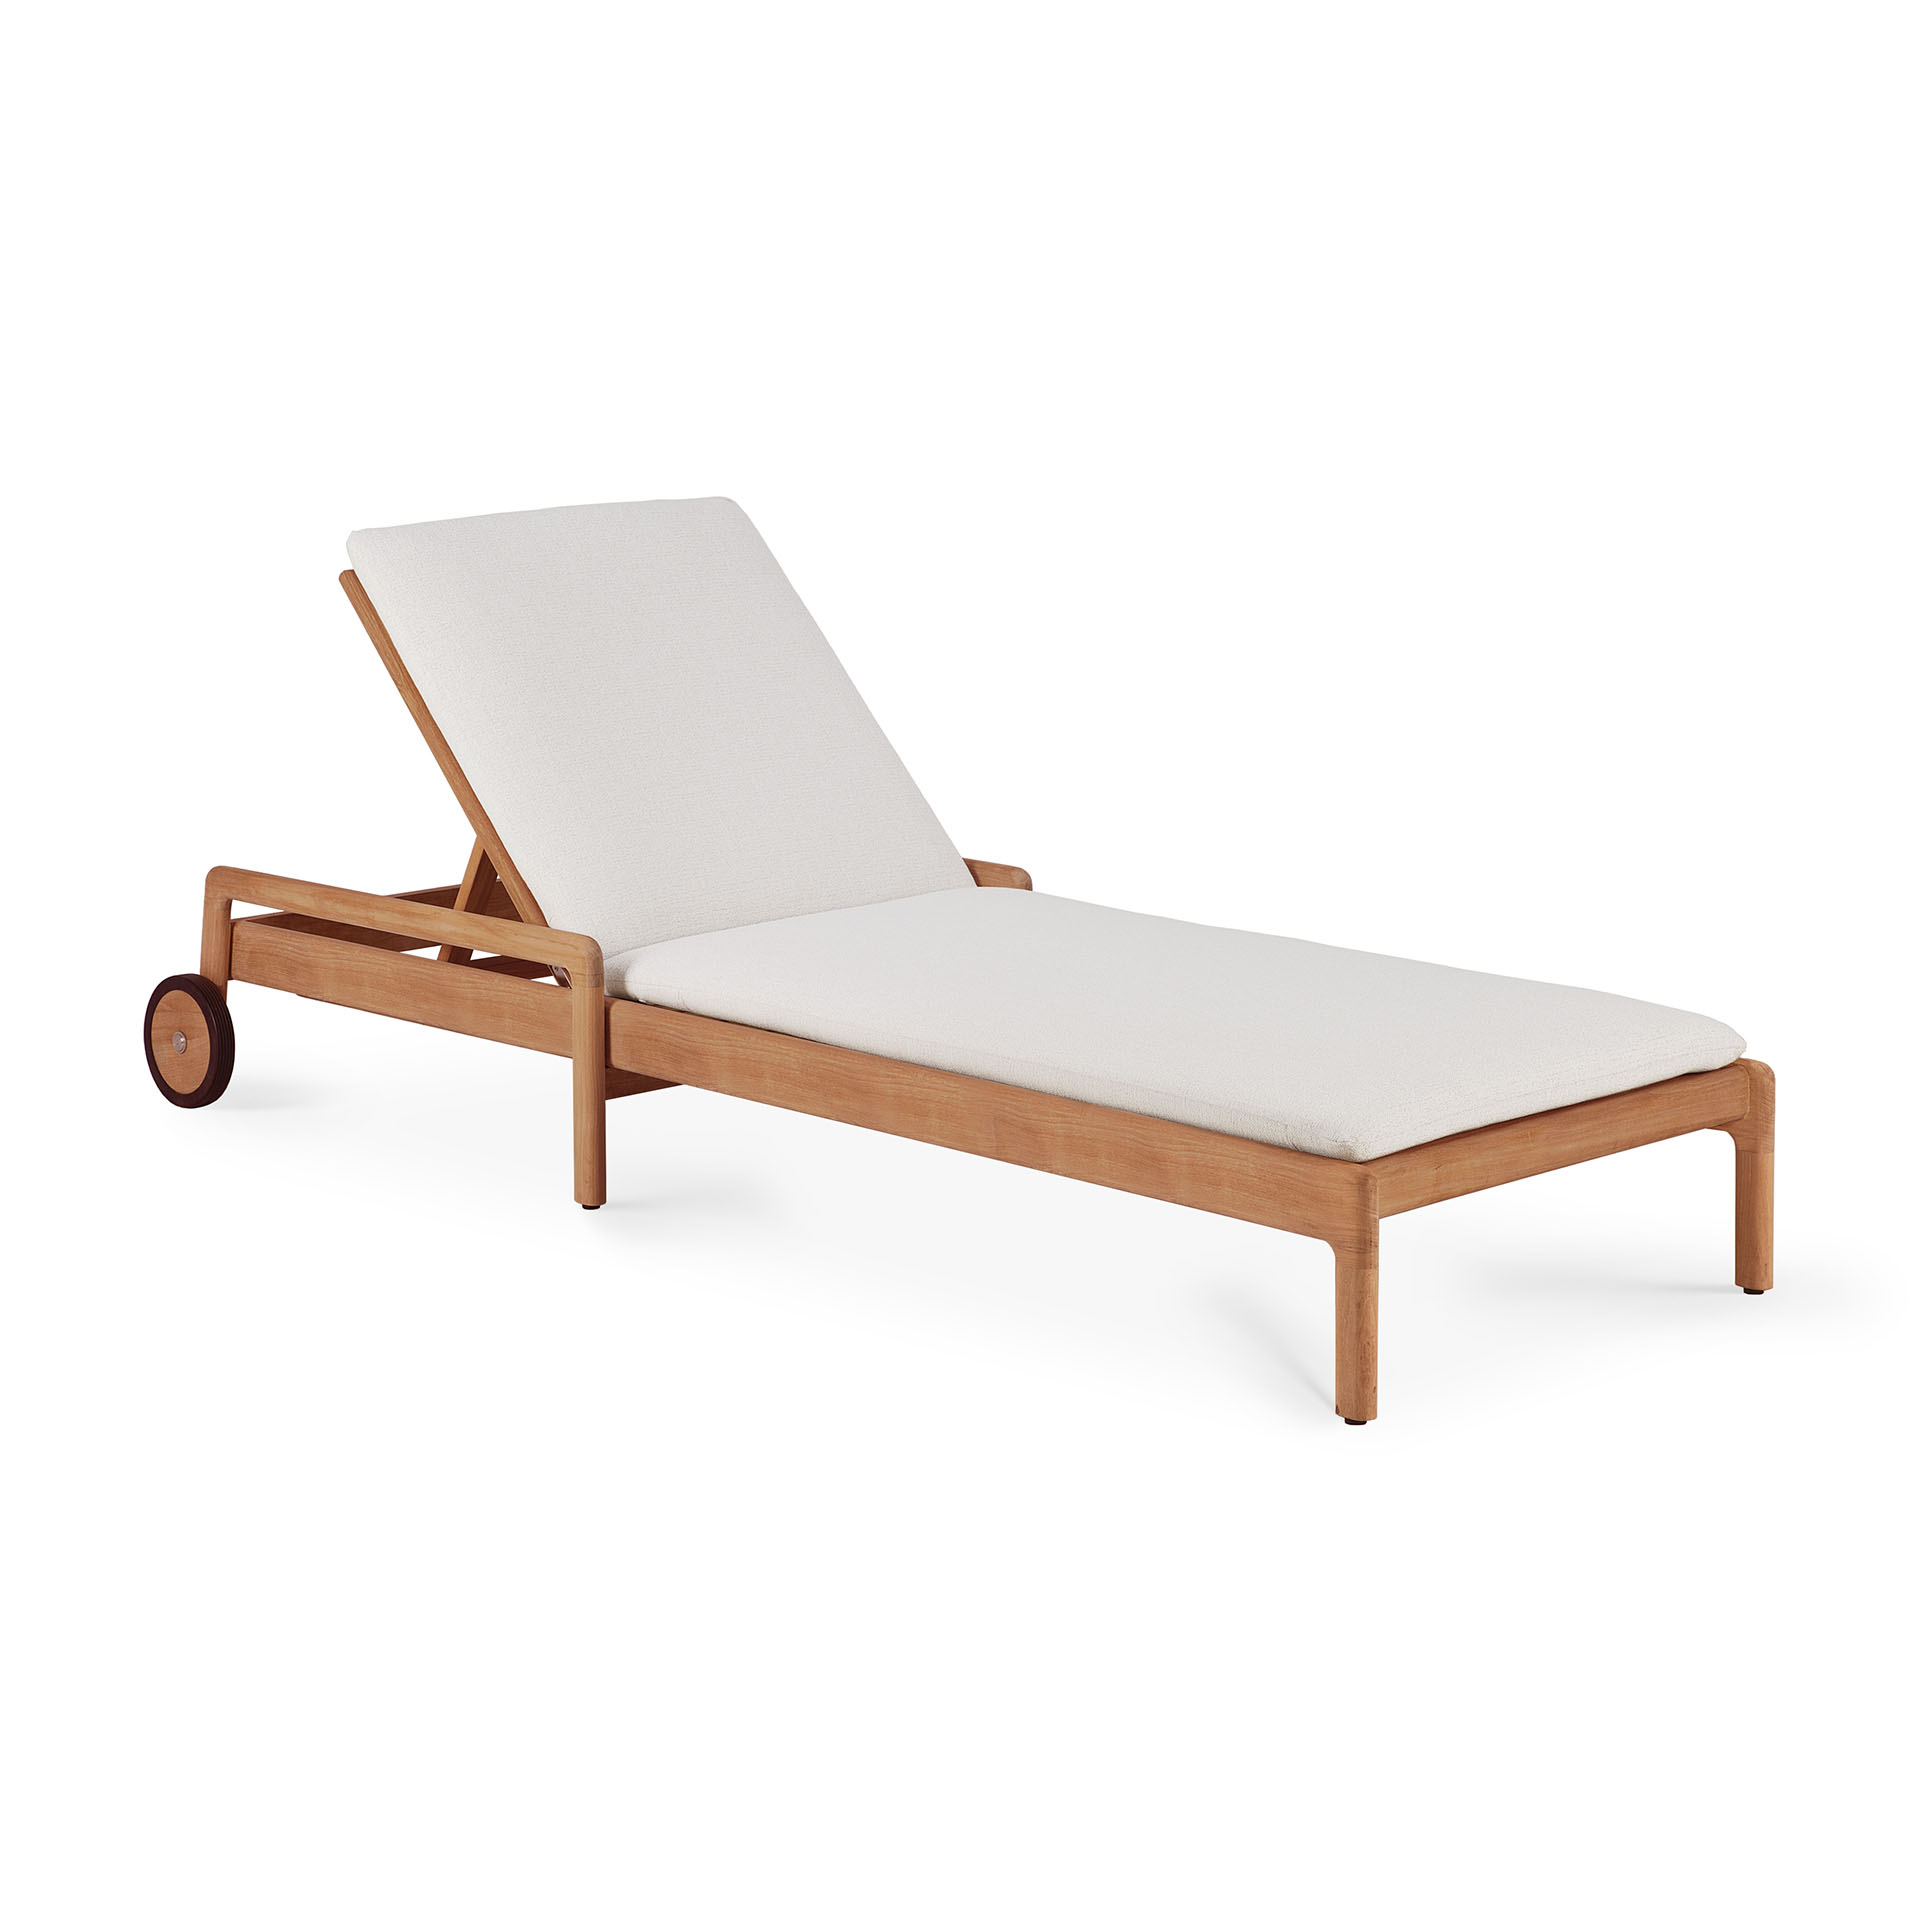 10256_21092_Teak_Jack_outdoor_adjustable_lounger_off_white_thin_cushion_front_cut_web